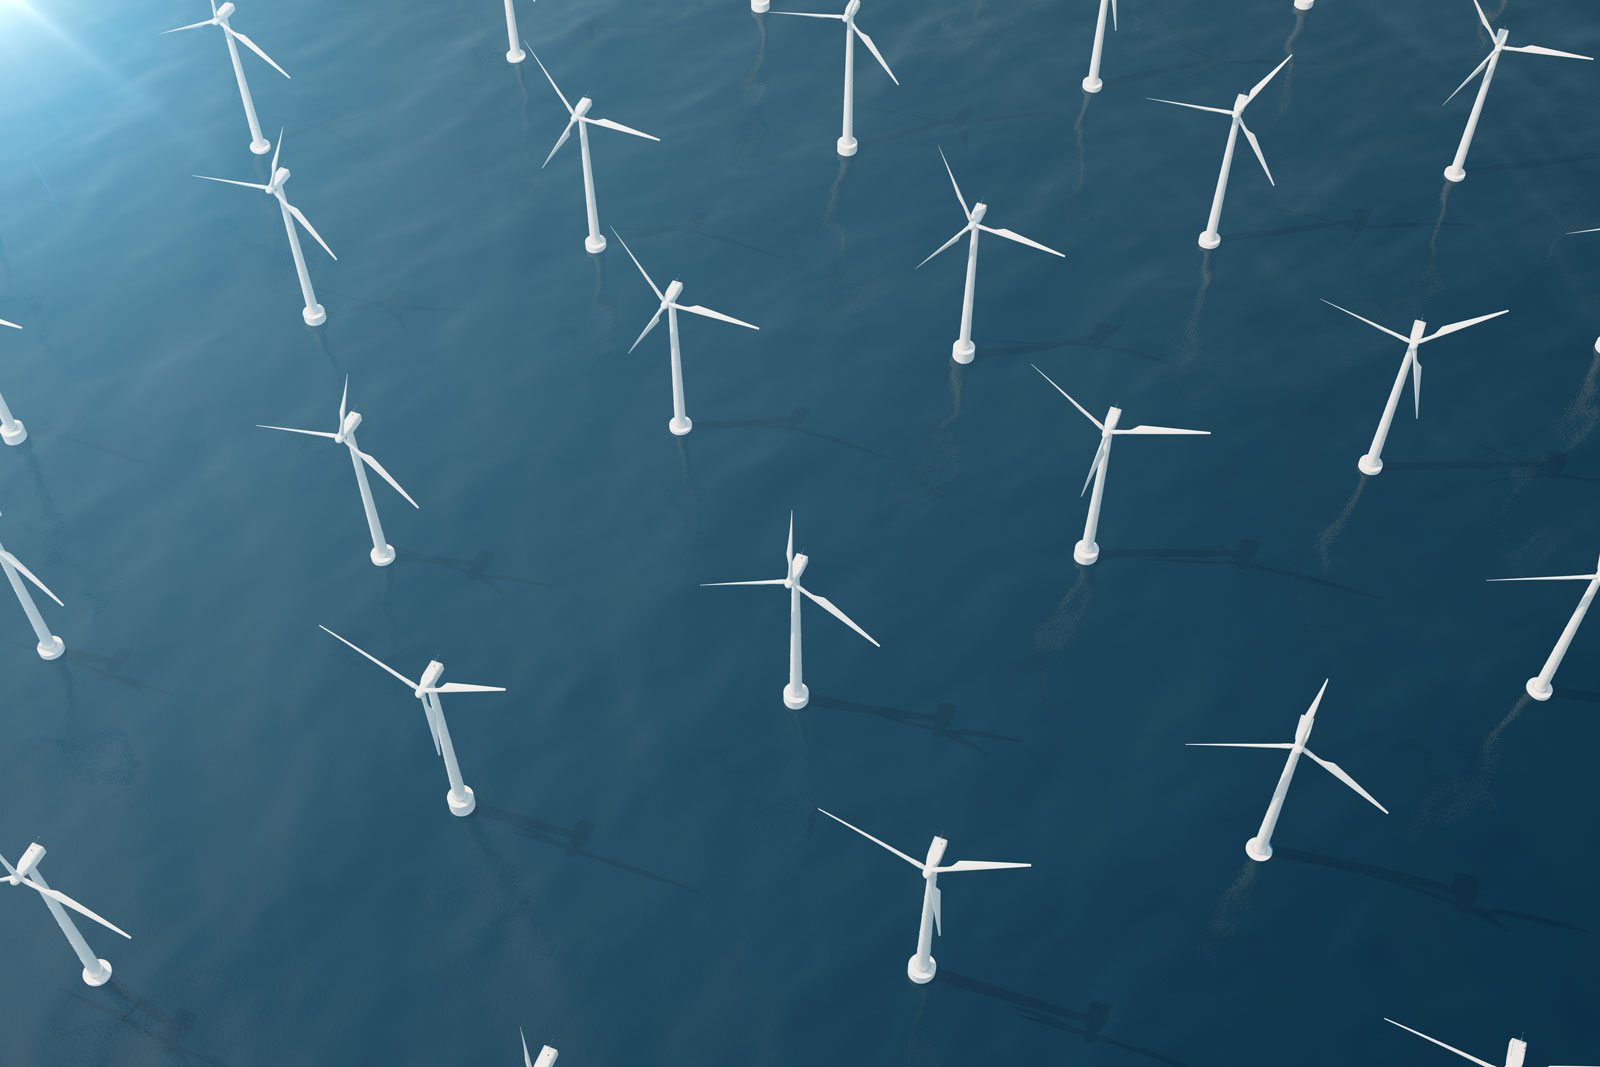 wind farm on the ocean - Socially Responsible Investing